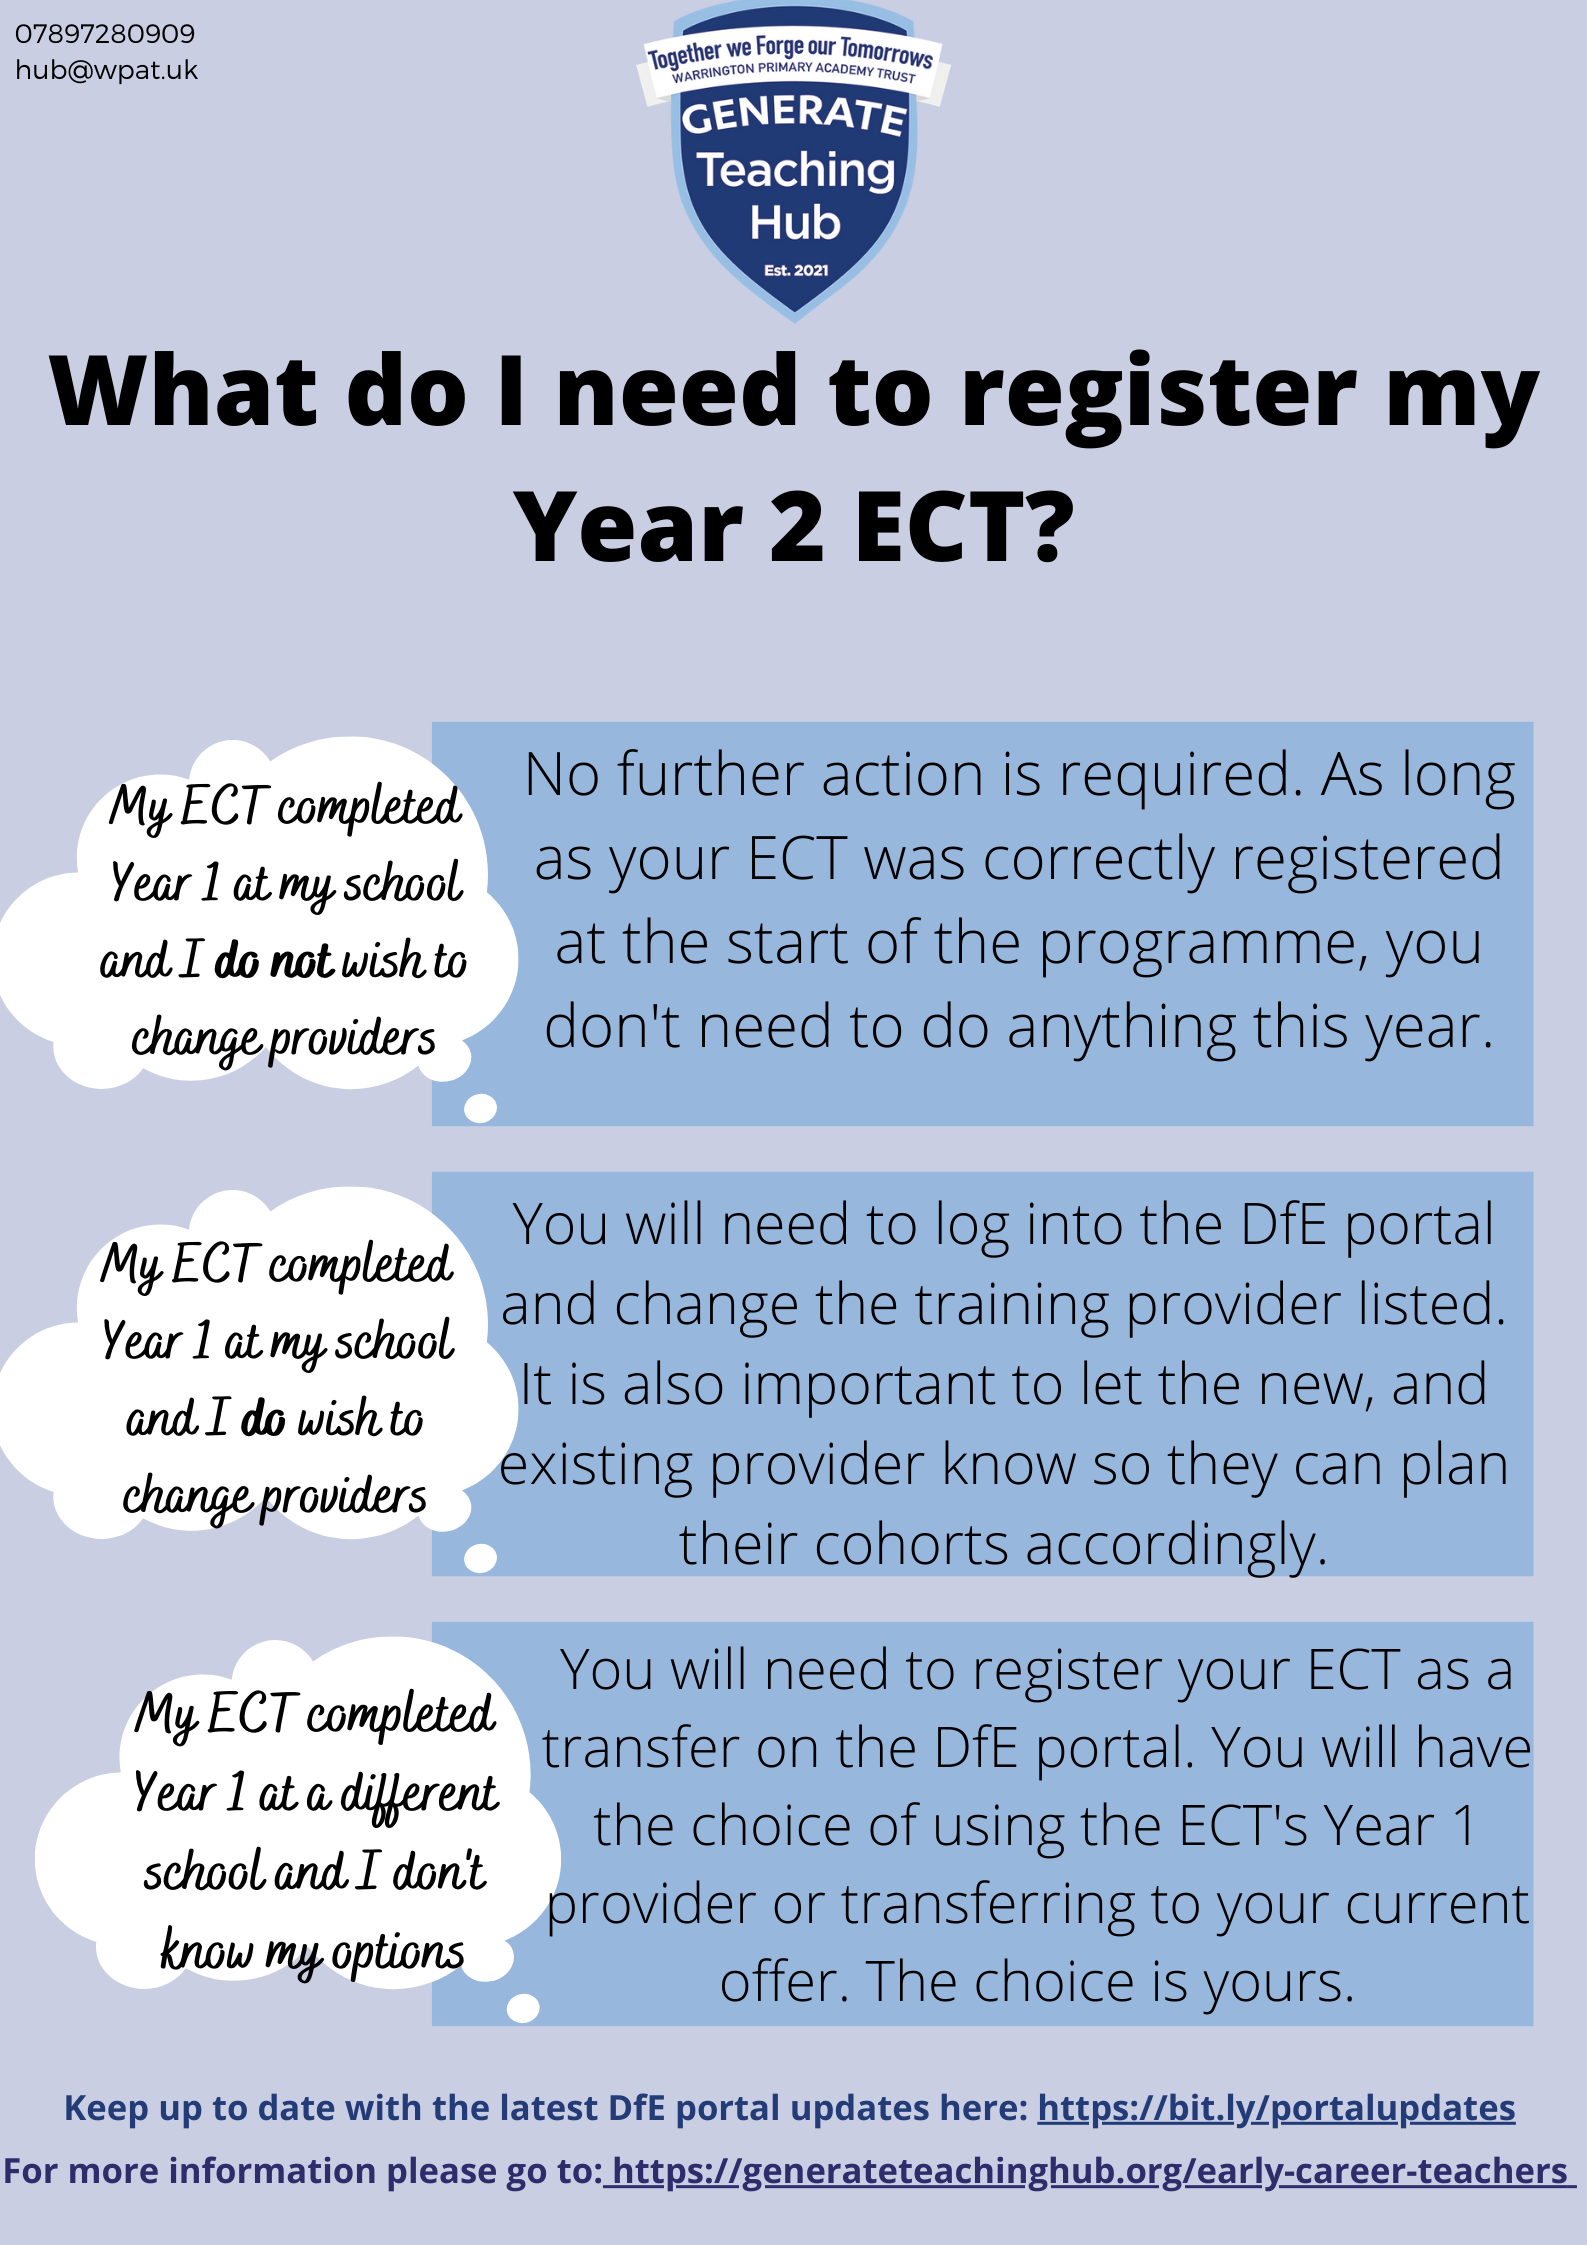 Registering a Year 2 ECT